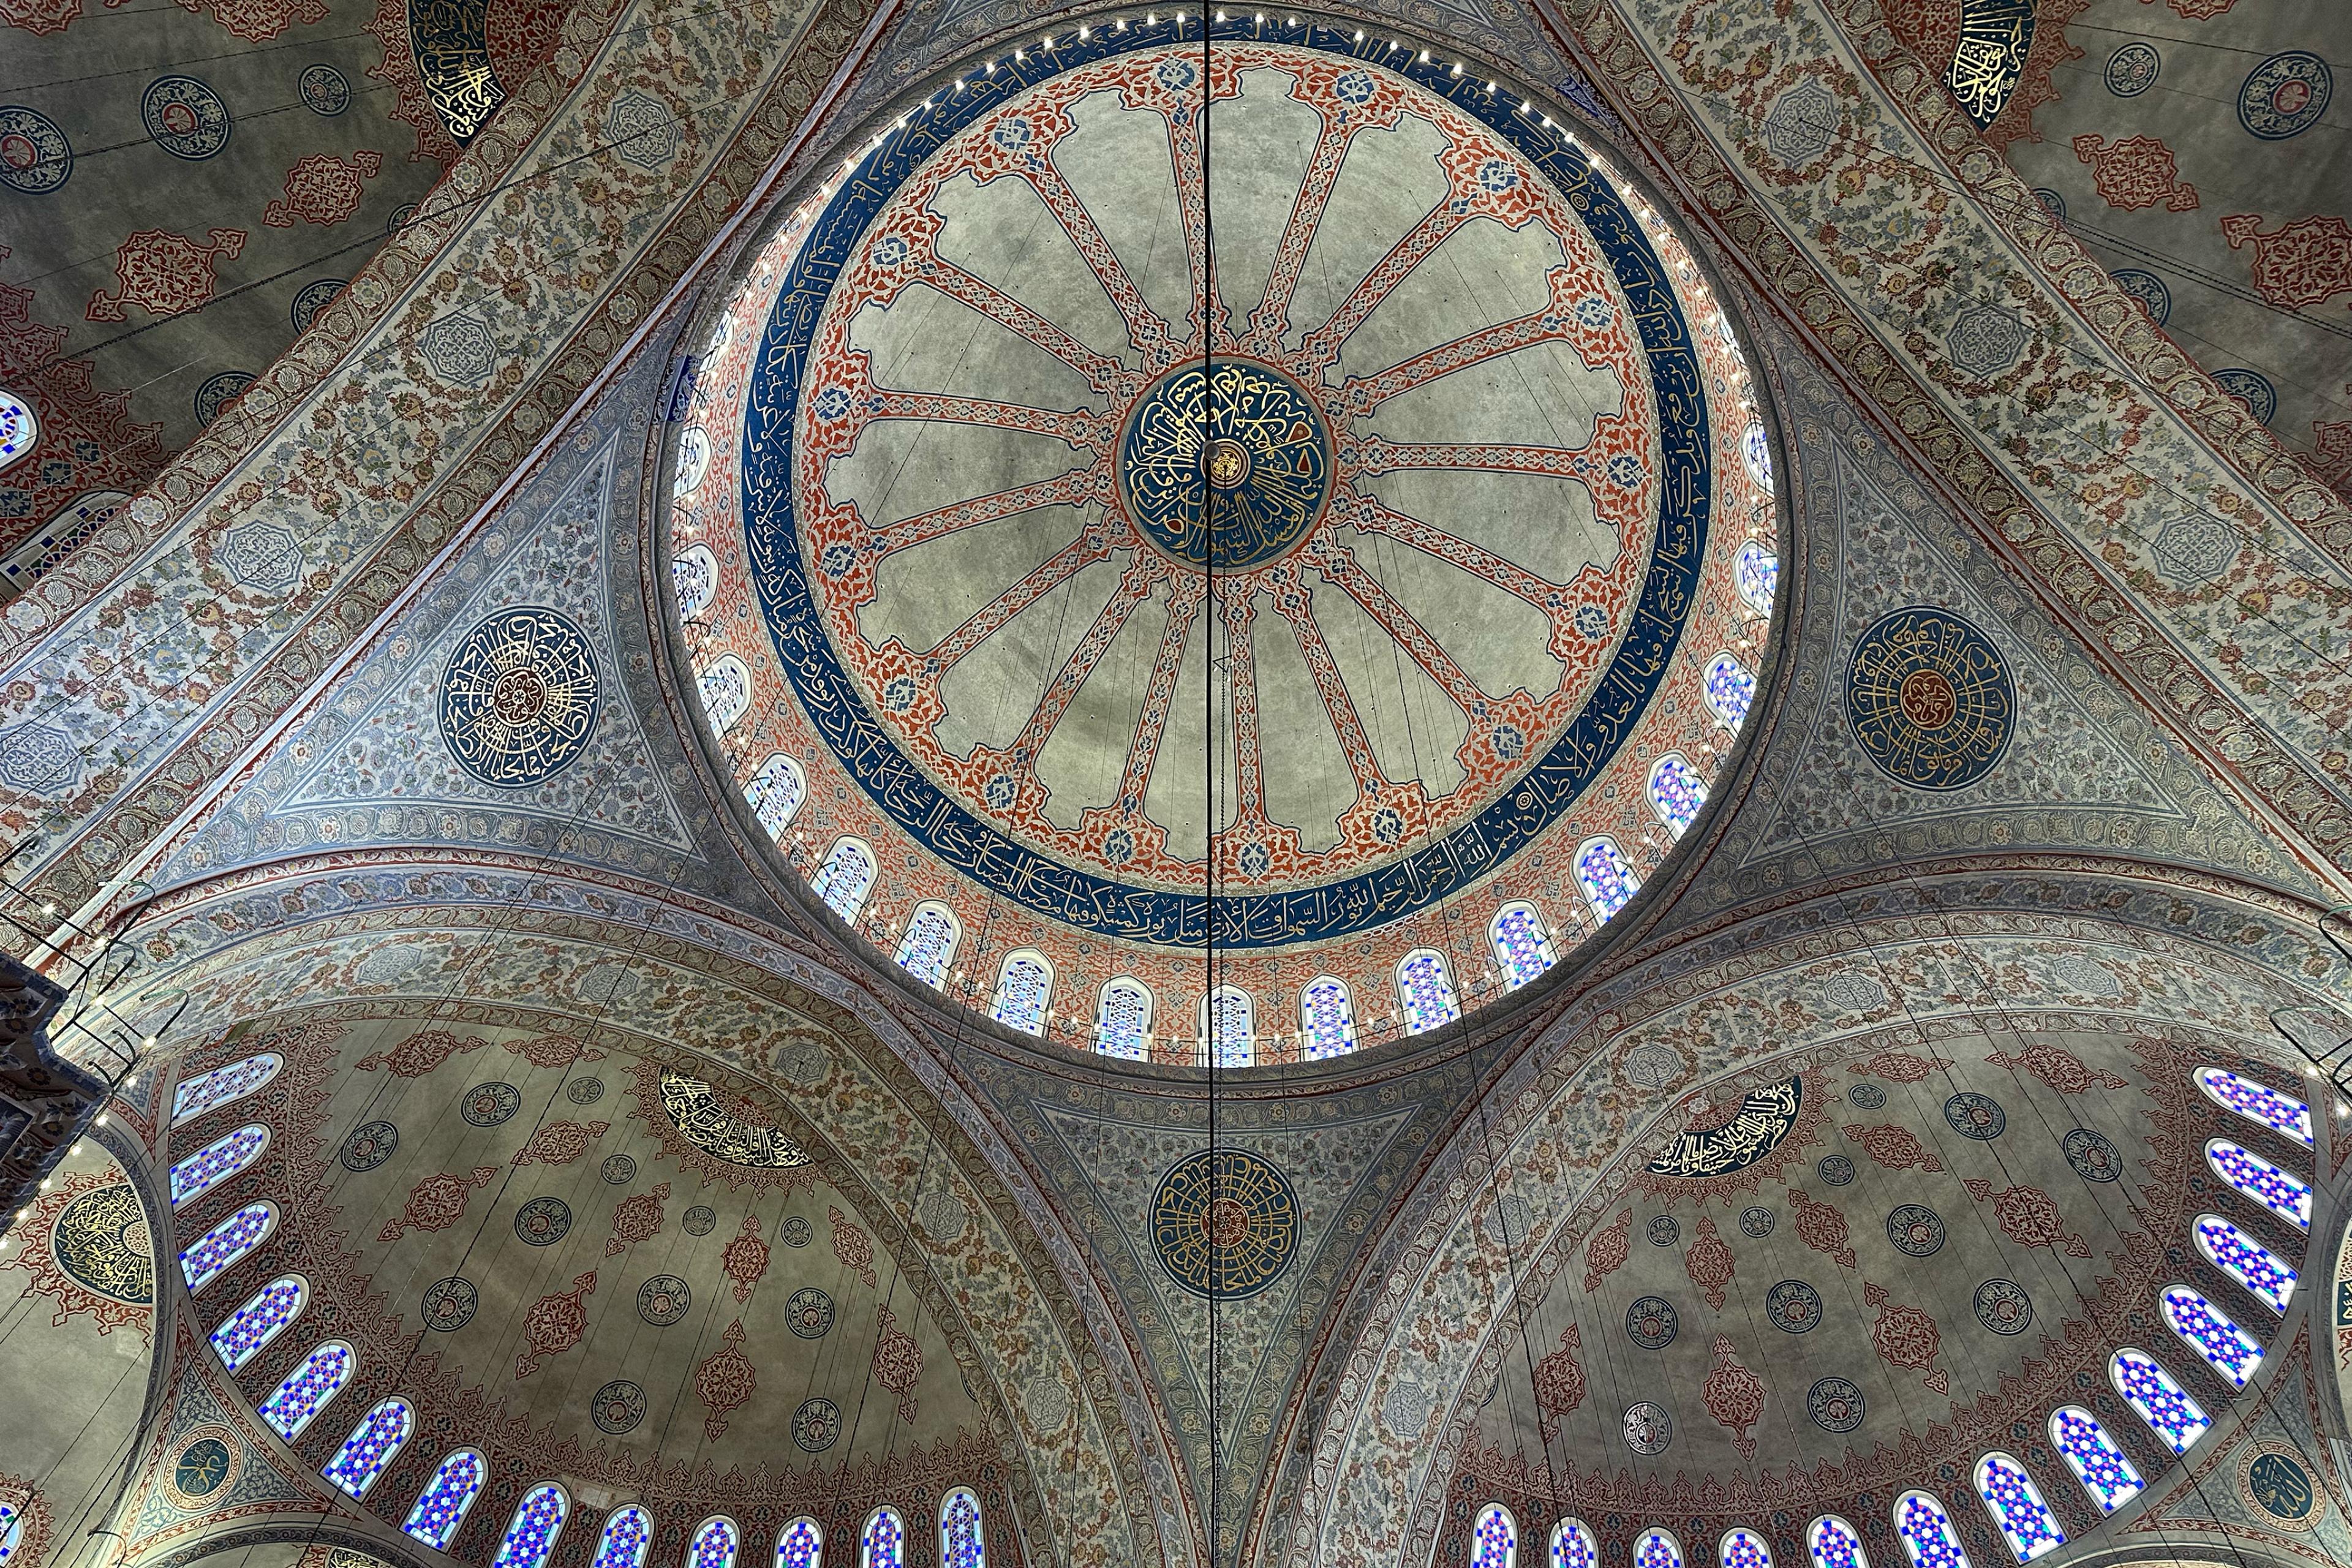 intricately painted domed mosque ceiling